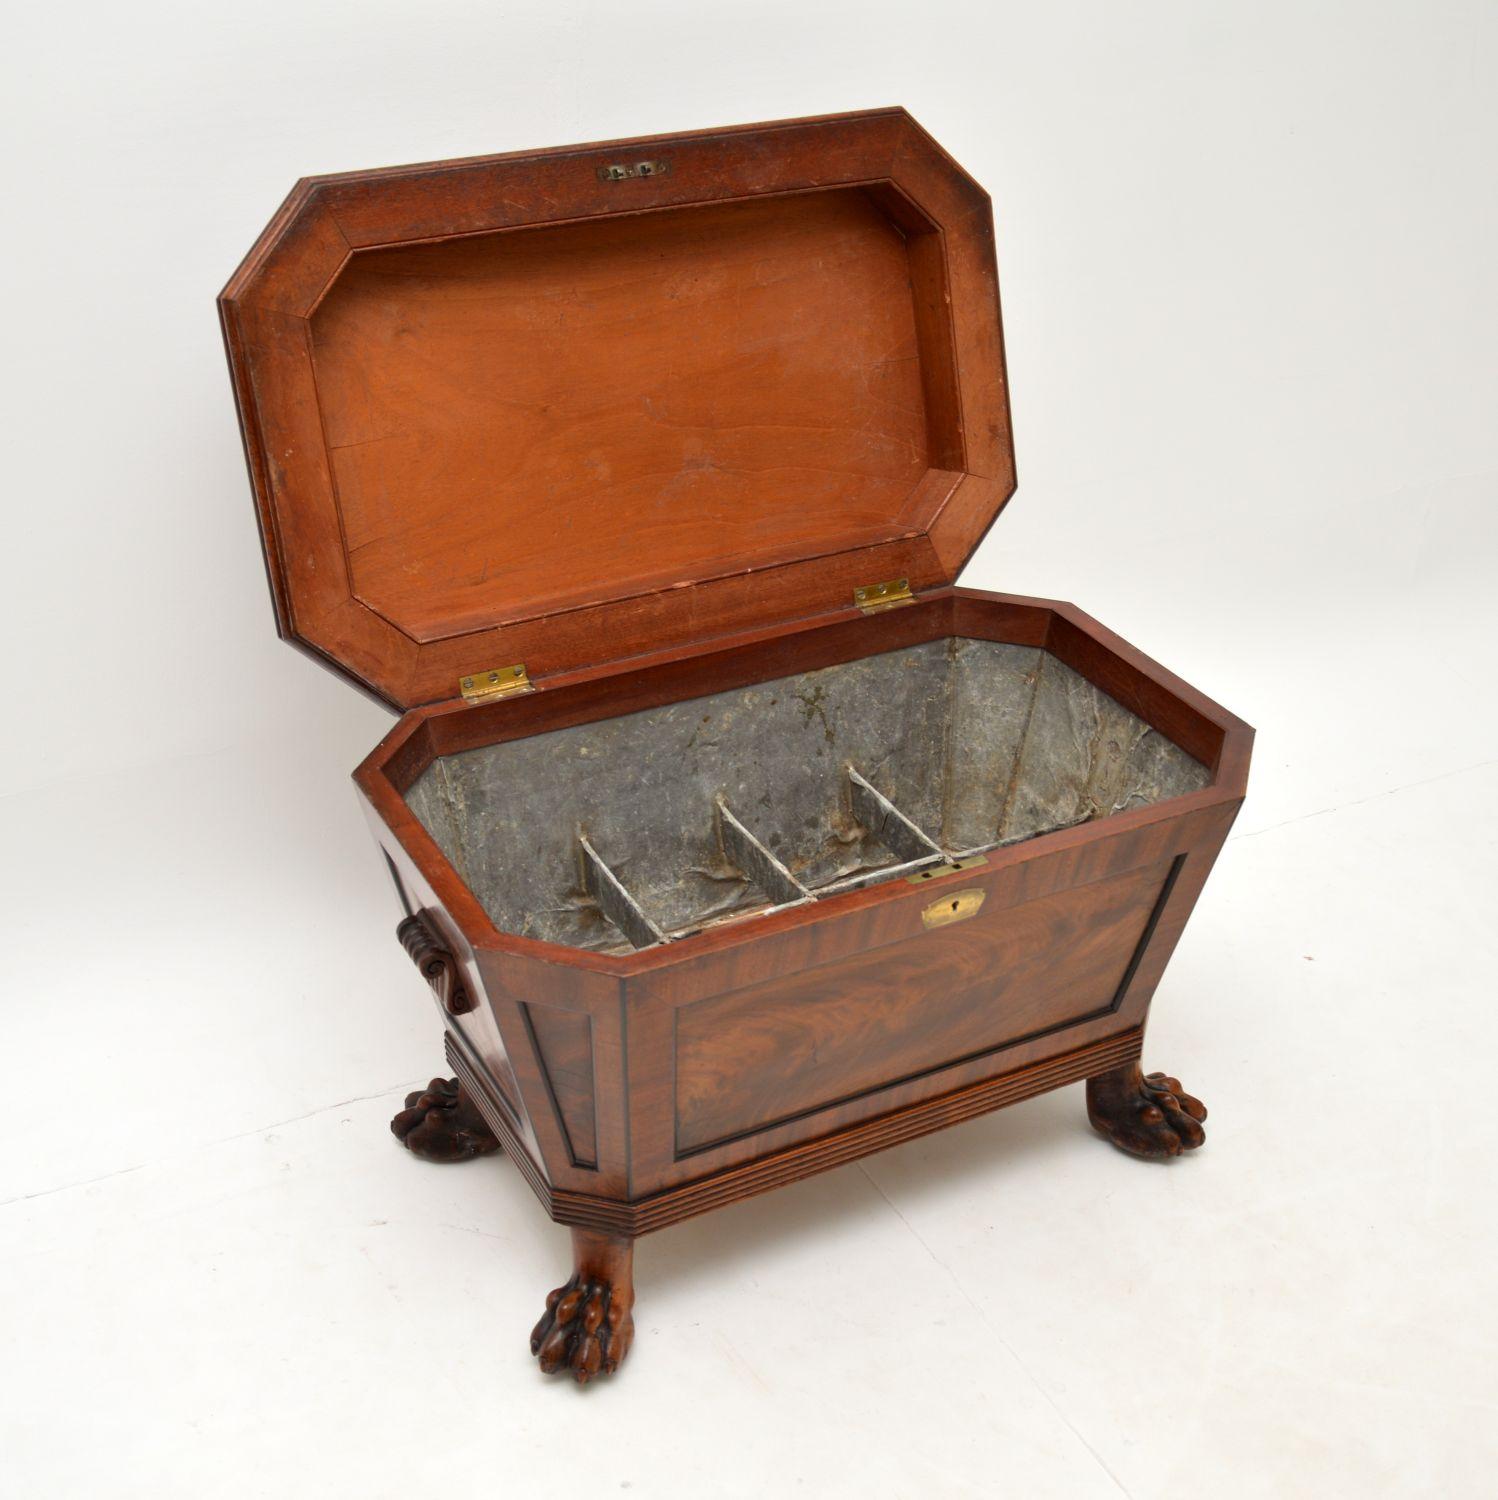 A beautifully made and rare original antique Georgian period wine cooler. This dates from around 1800-1810 period.
It is of excellent quality and is in superb original condition. We have cleaned and given it a wax polish, there is only some old